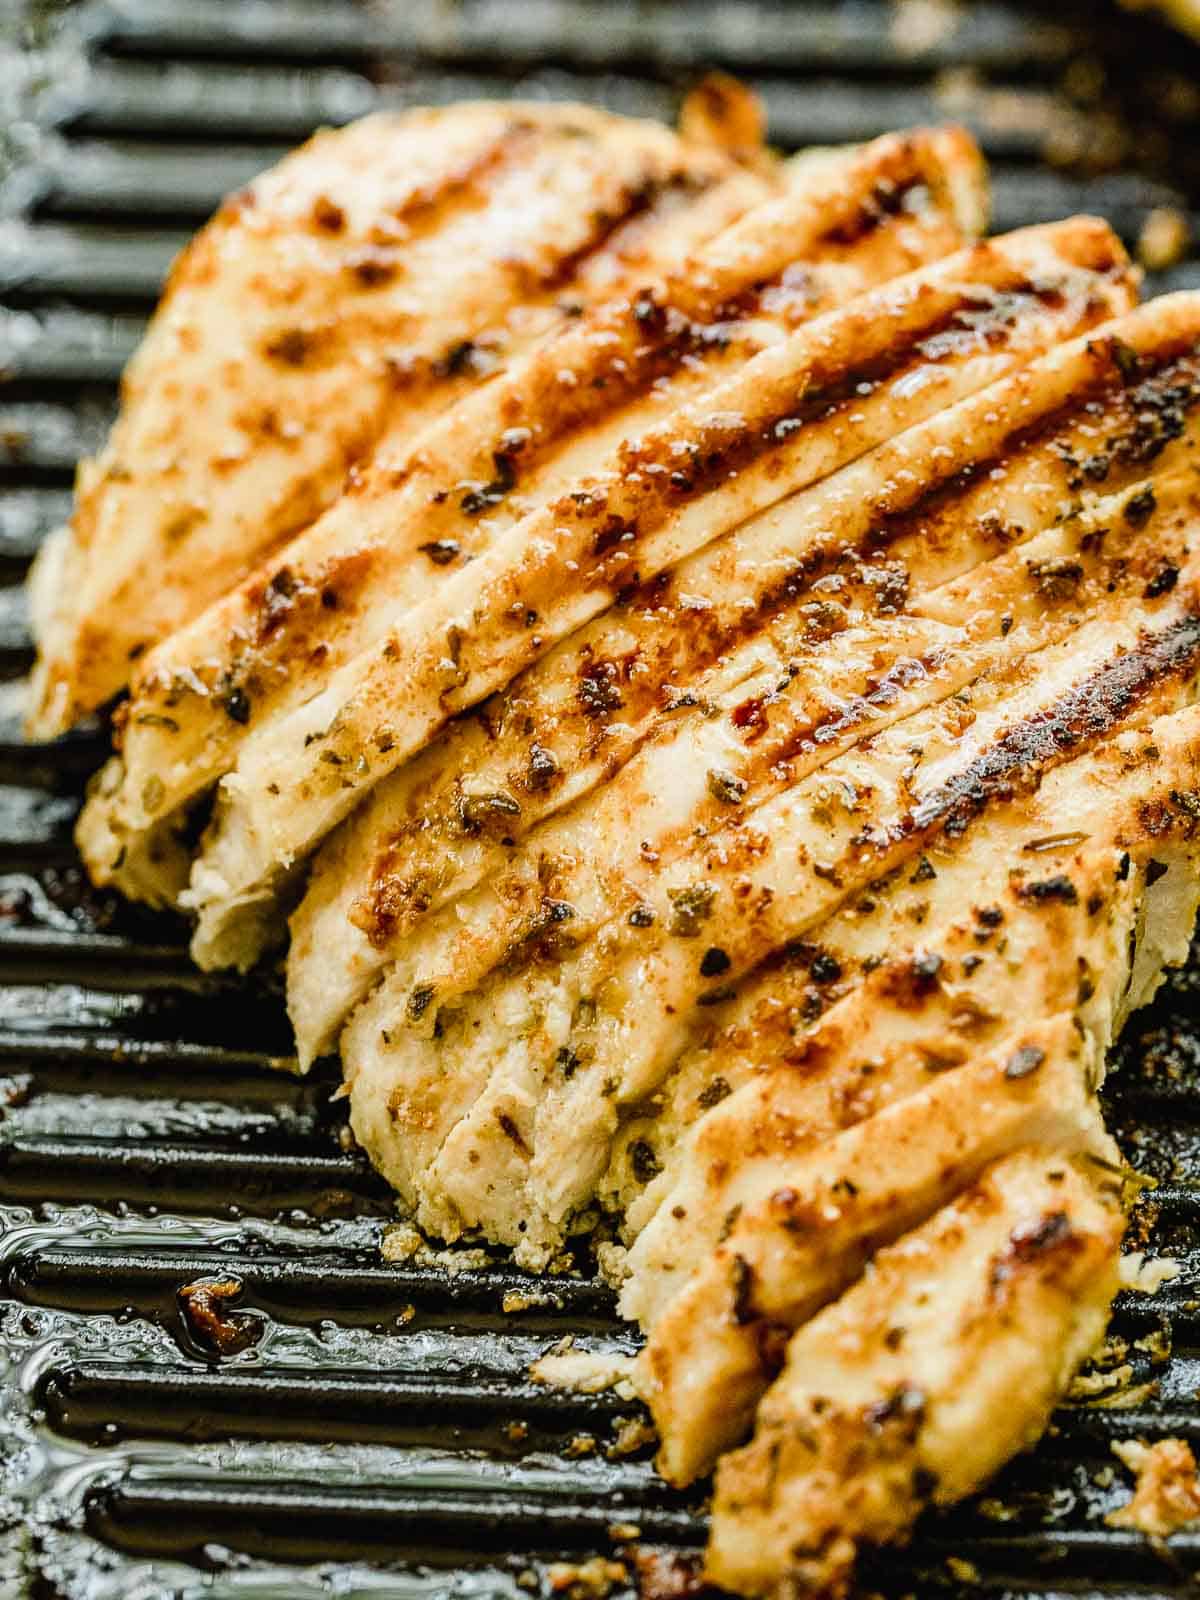 A sliced chicken breast on a grill pan.